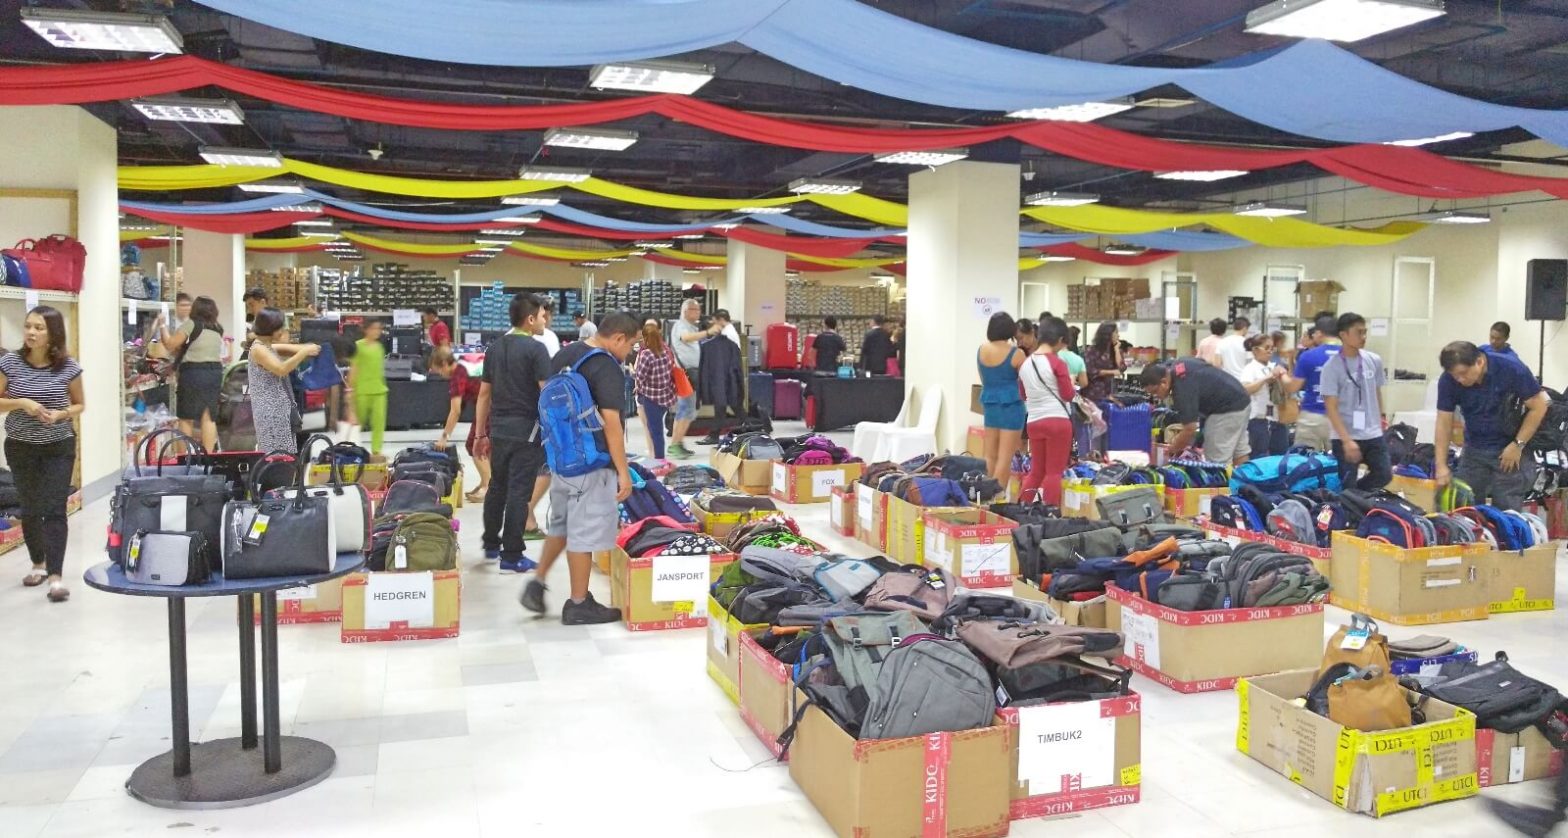 Look: huge discounts on luggage, bags, shoes, shirts in Primer Group bodega sale